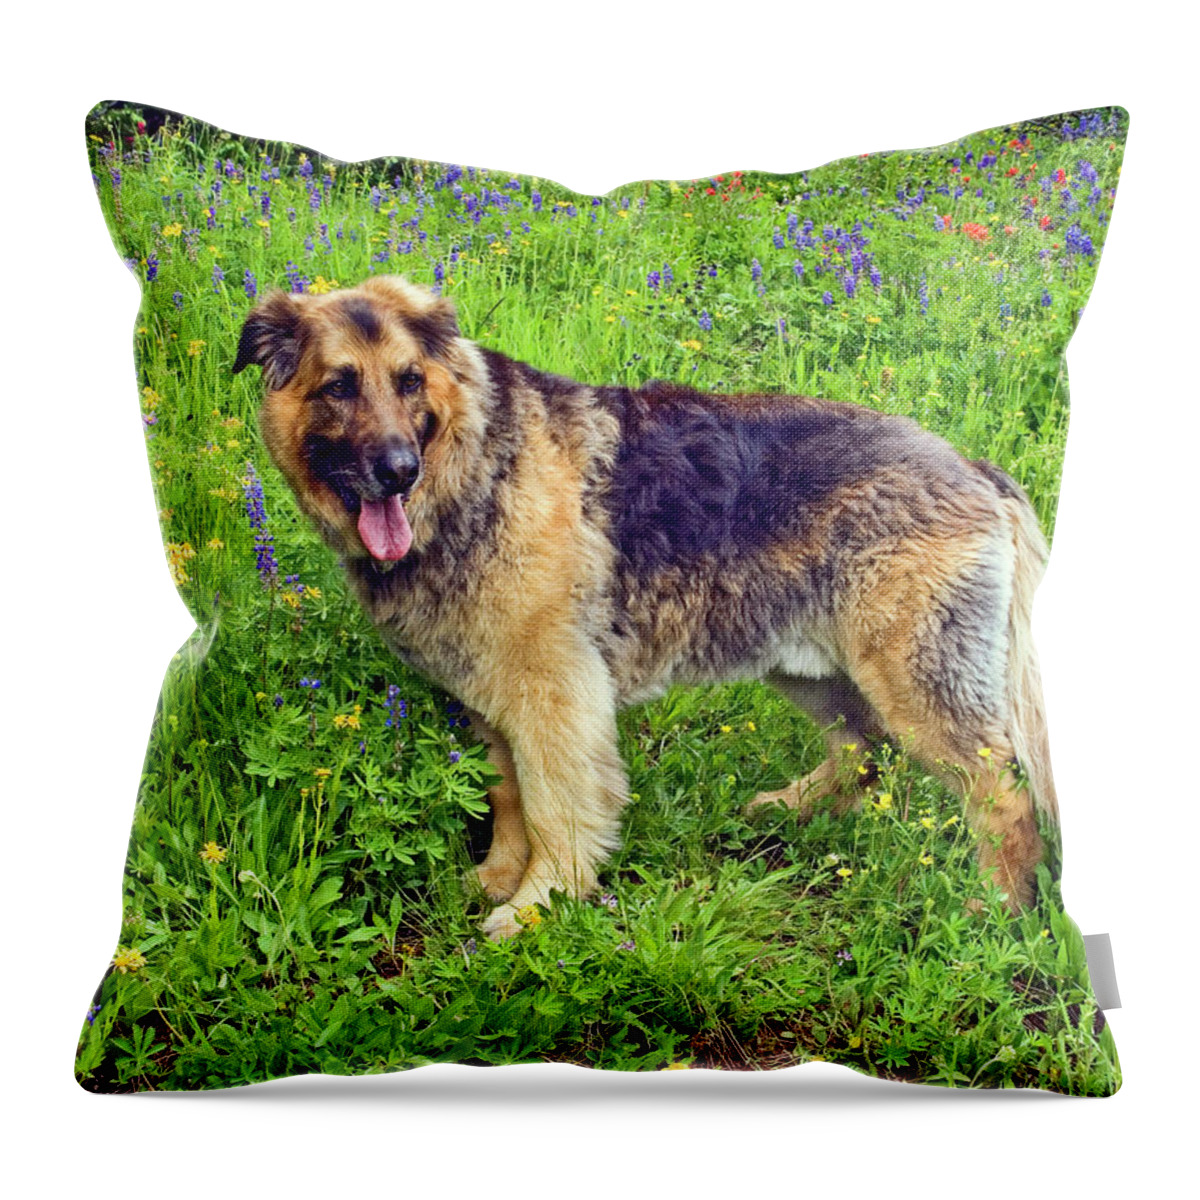 Large Dog Standing Throw Pillow featuring the photograph Handsome Dog in Wildflowers by Sally Weigand